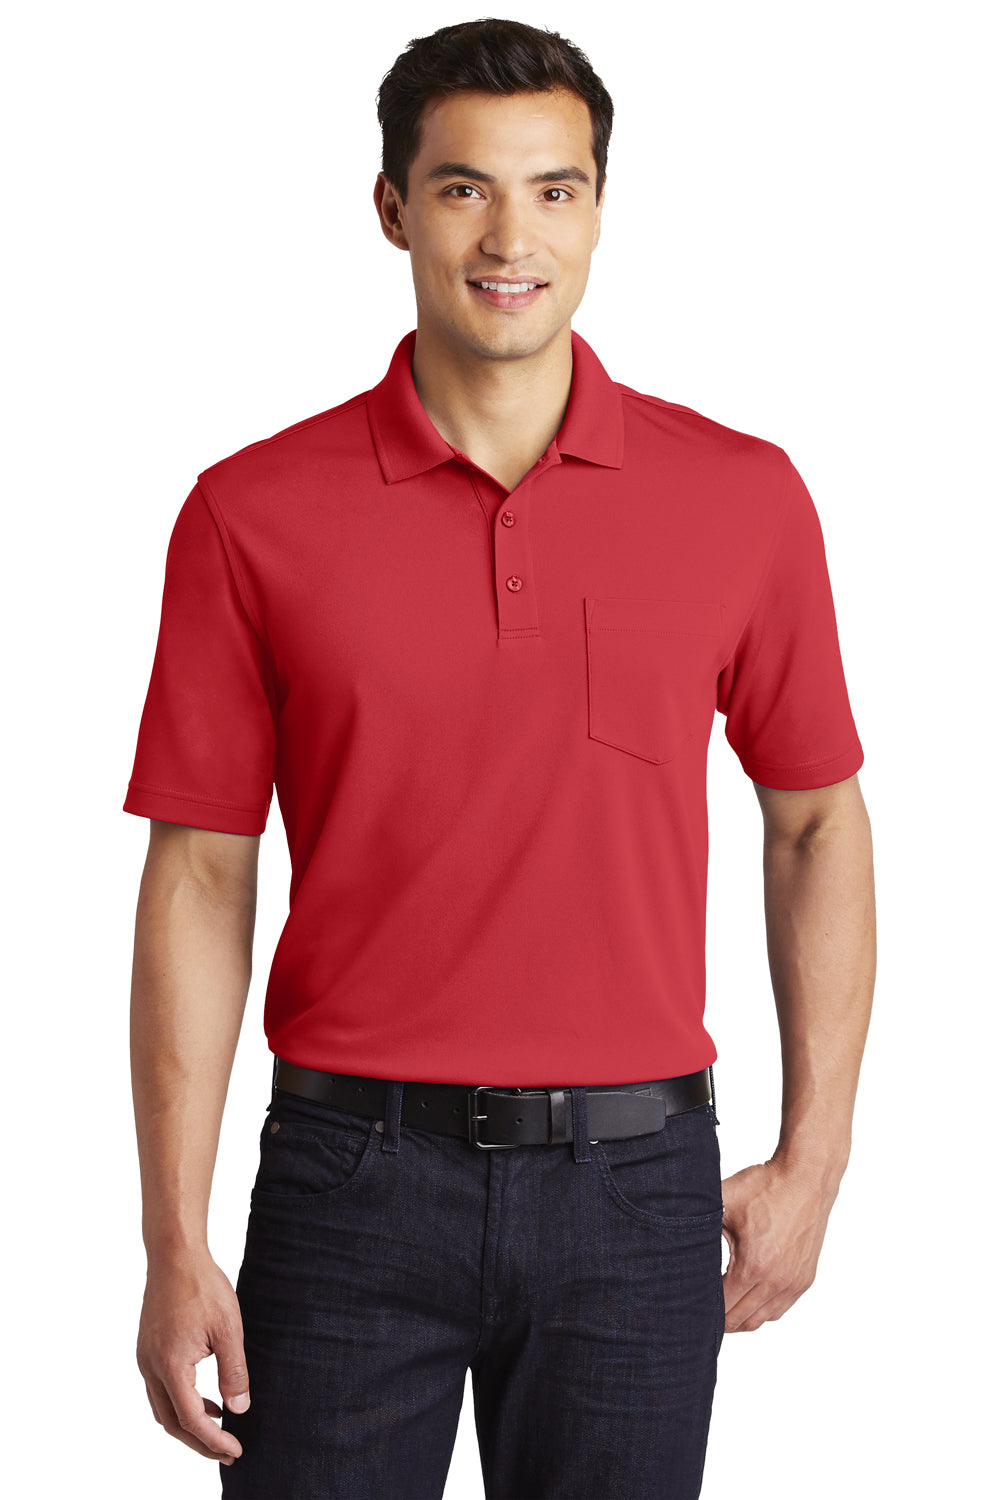 Port Authority K110P Mens Dry Zone Moisture Wicking Short Sleeve Polo Shirt w/ Pocket Red Front